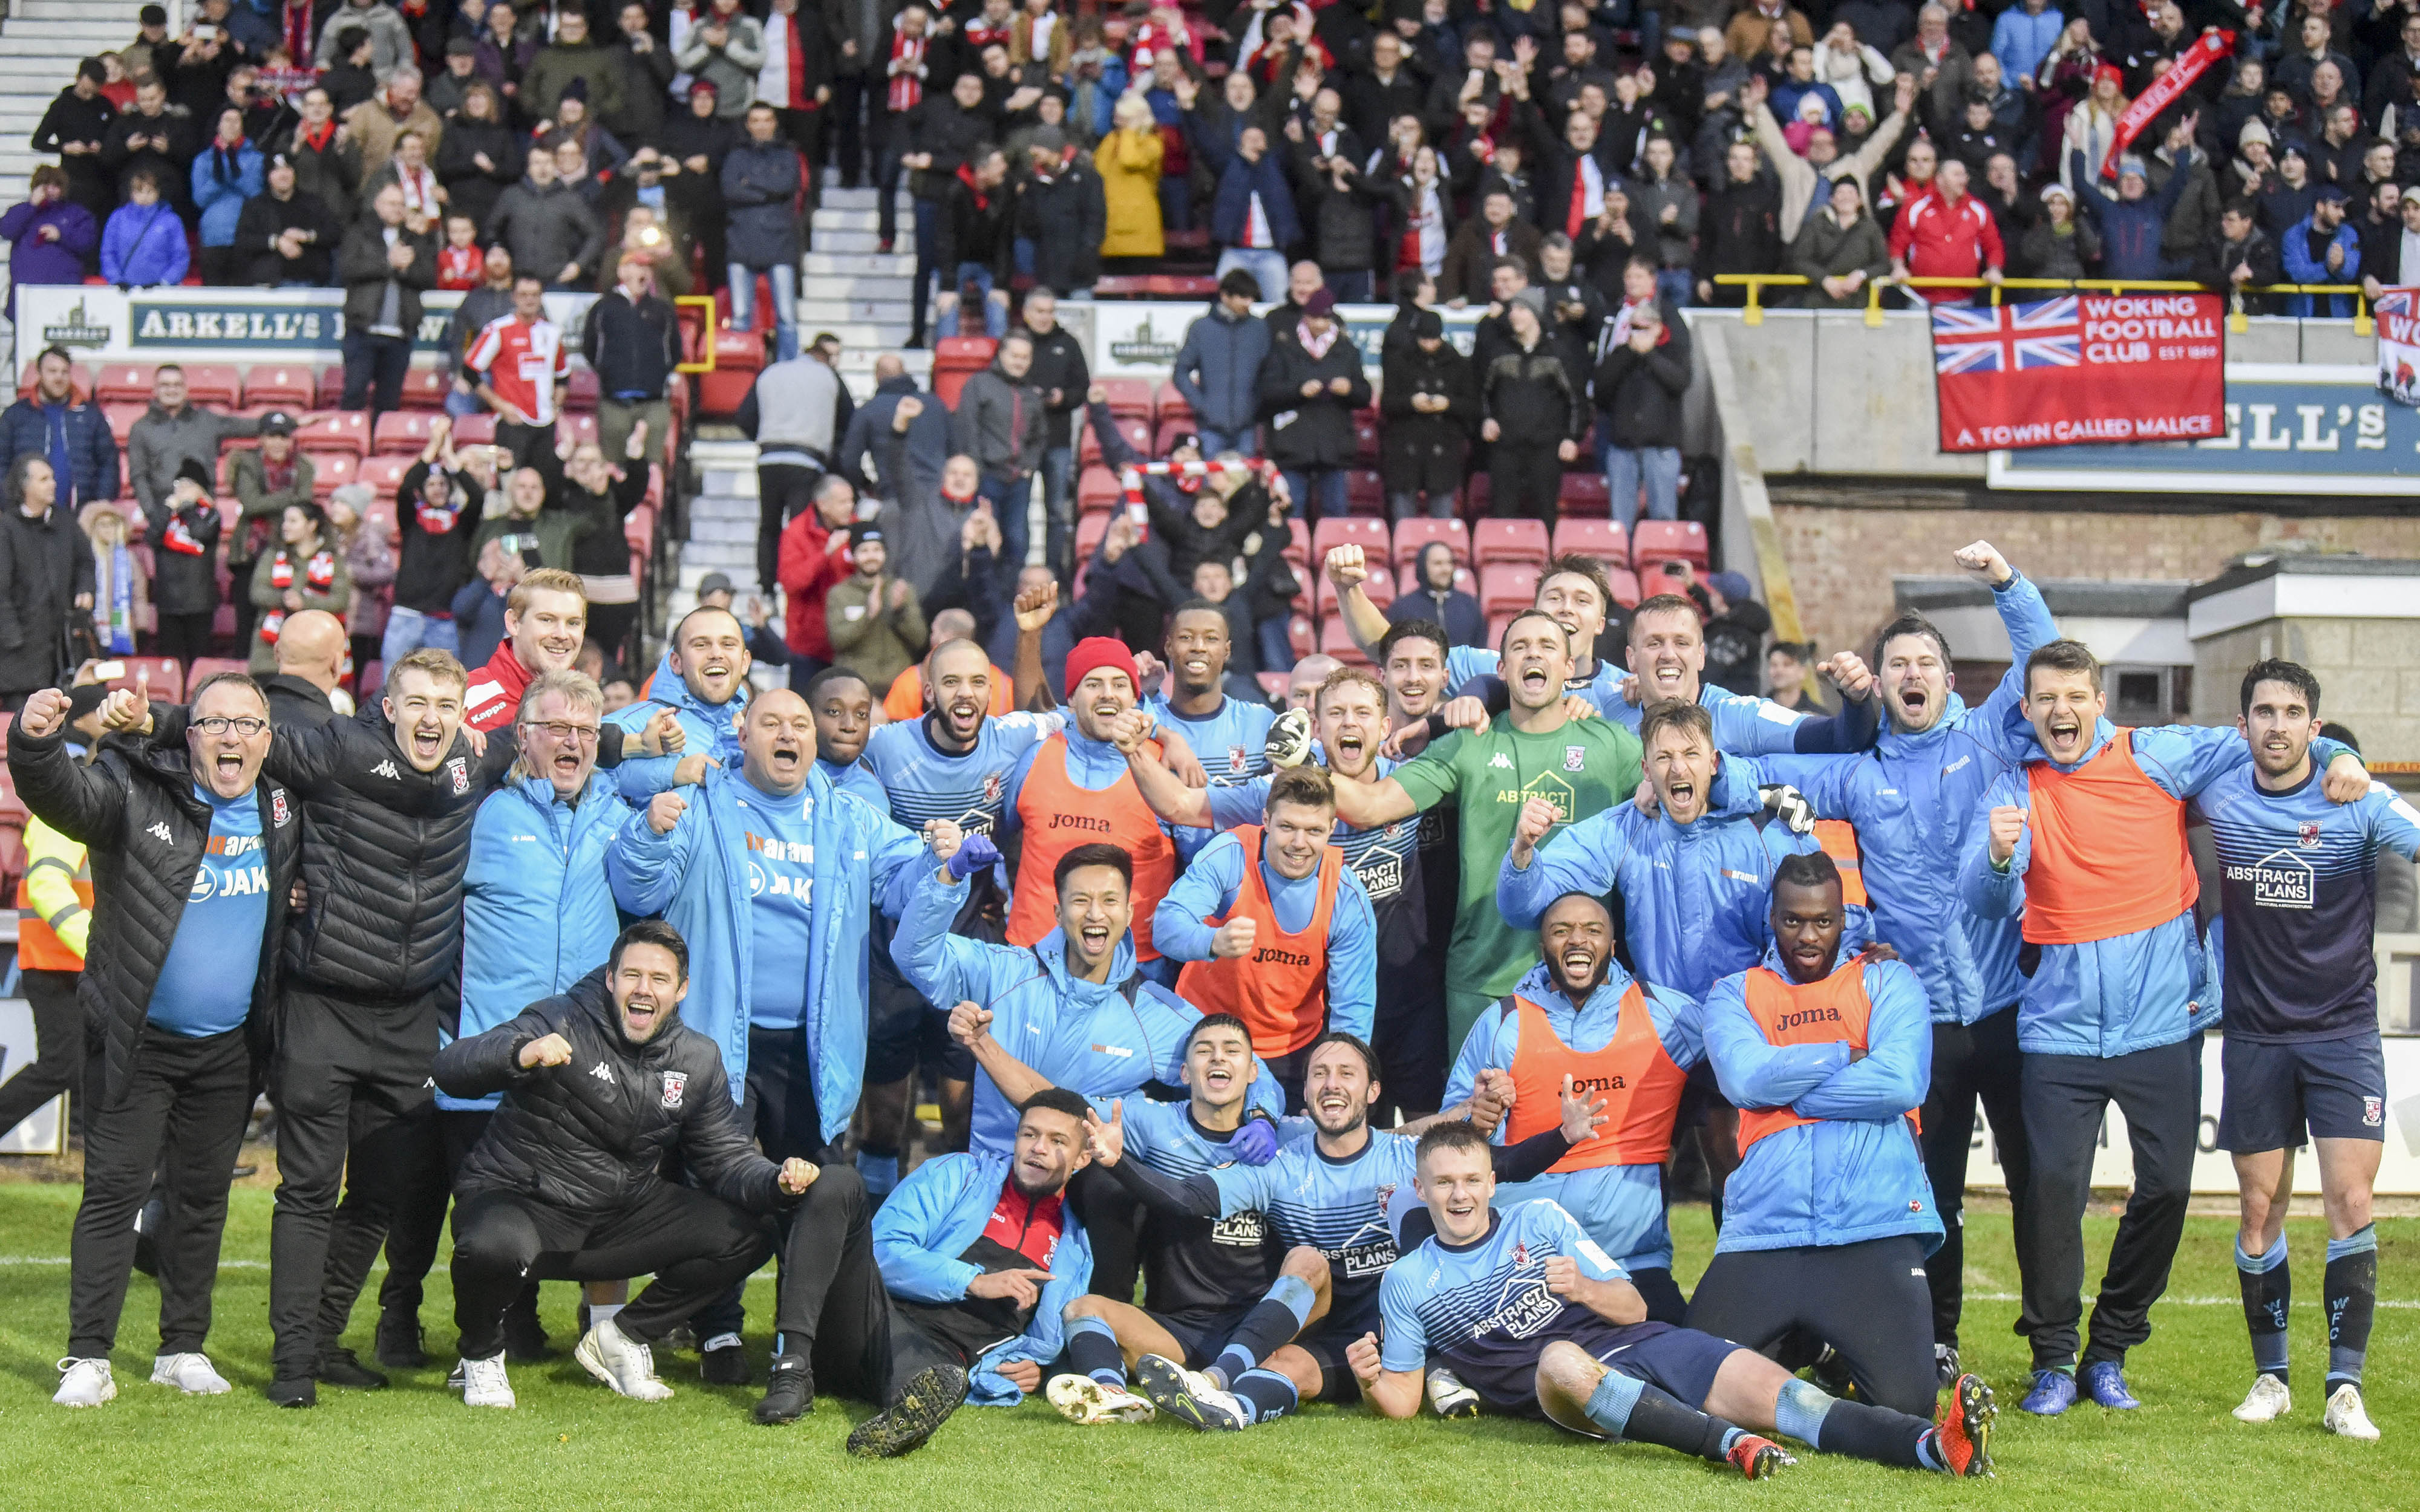 Woking players and fans celebrate a historic day in Swindon